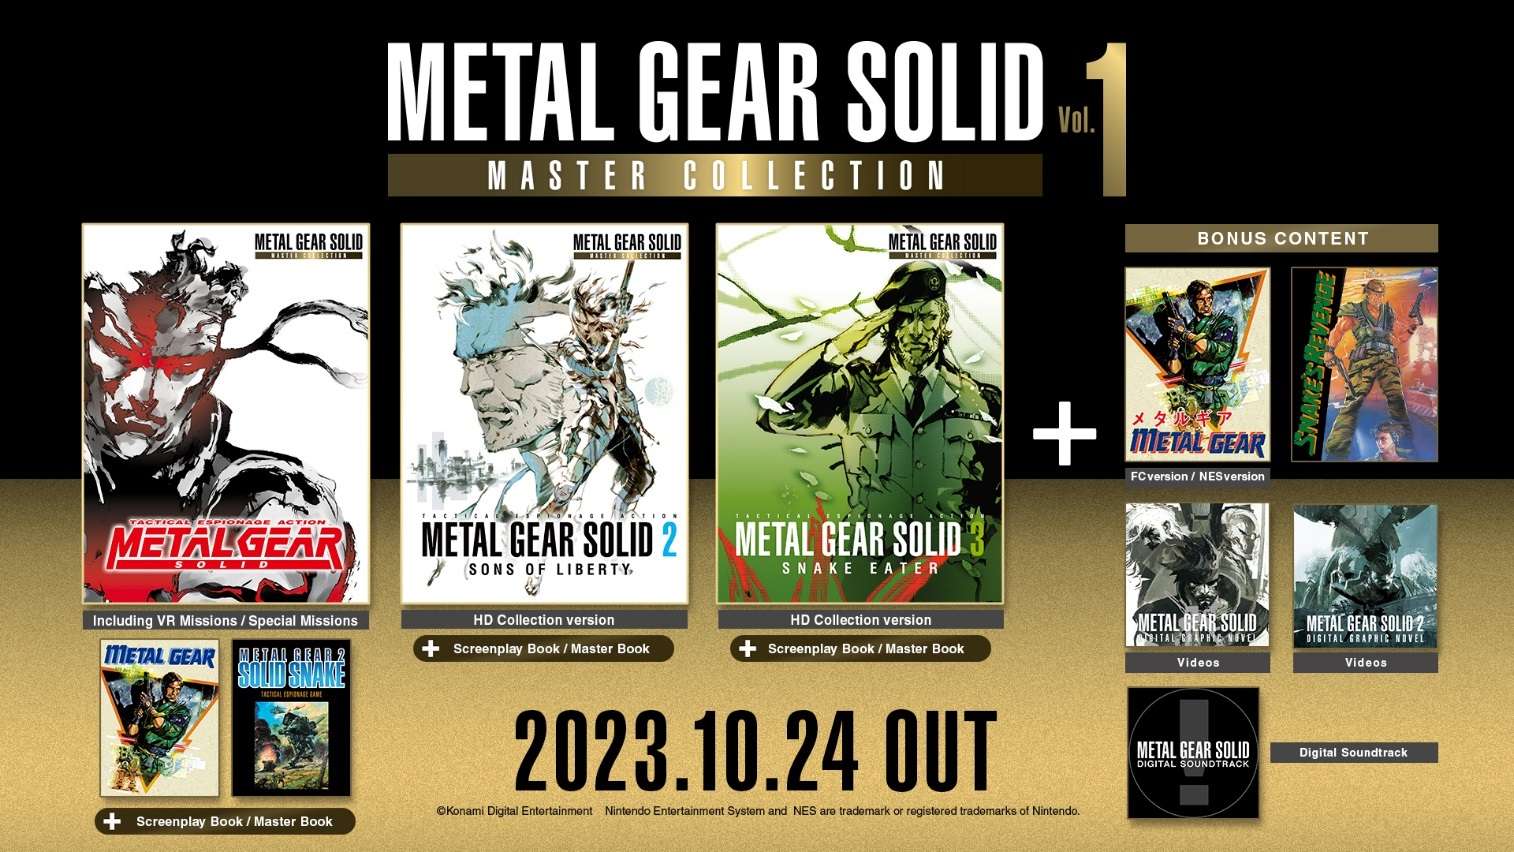 Metal Gear Solid: Master Collection Vol. 1 Now Available for PC and Console